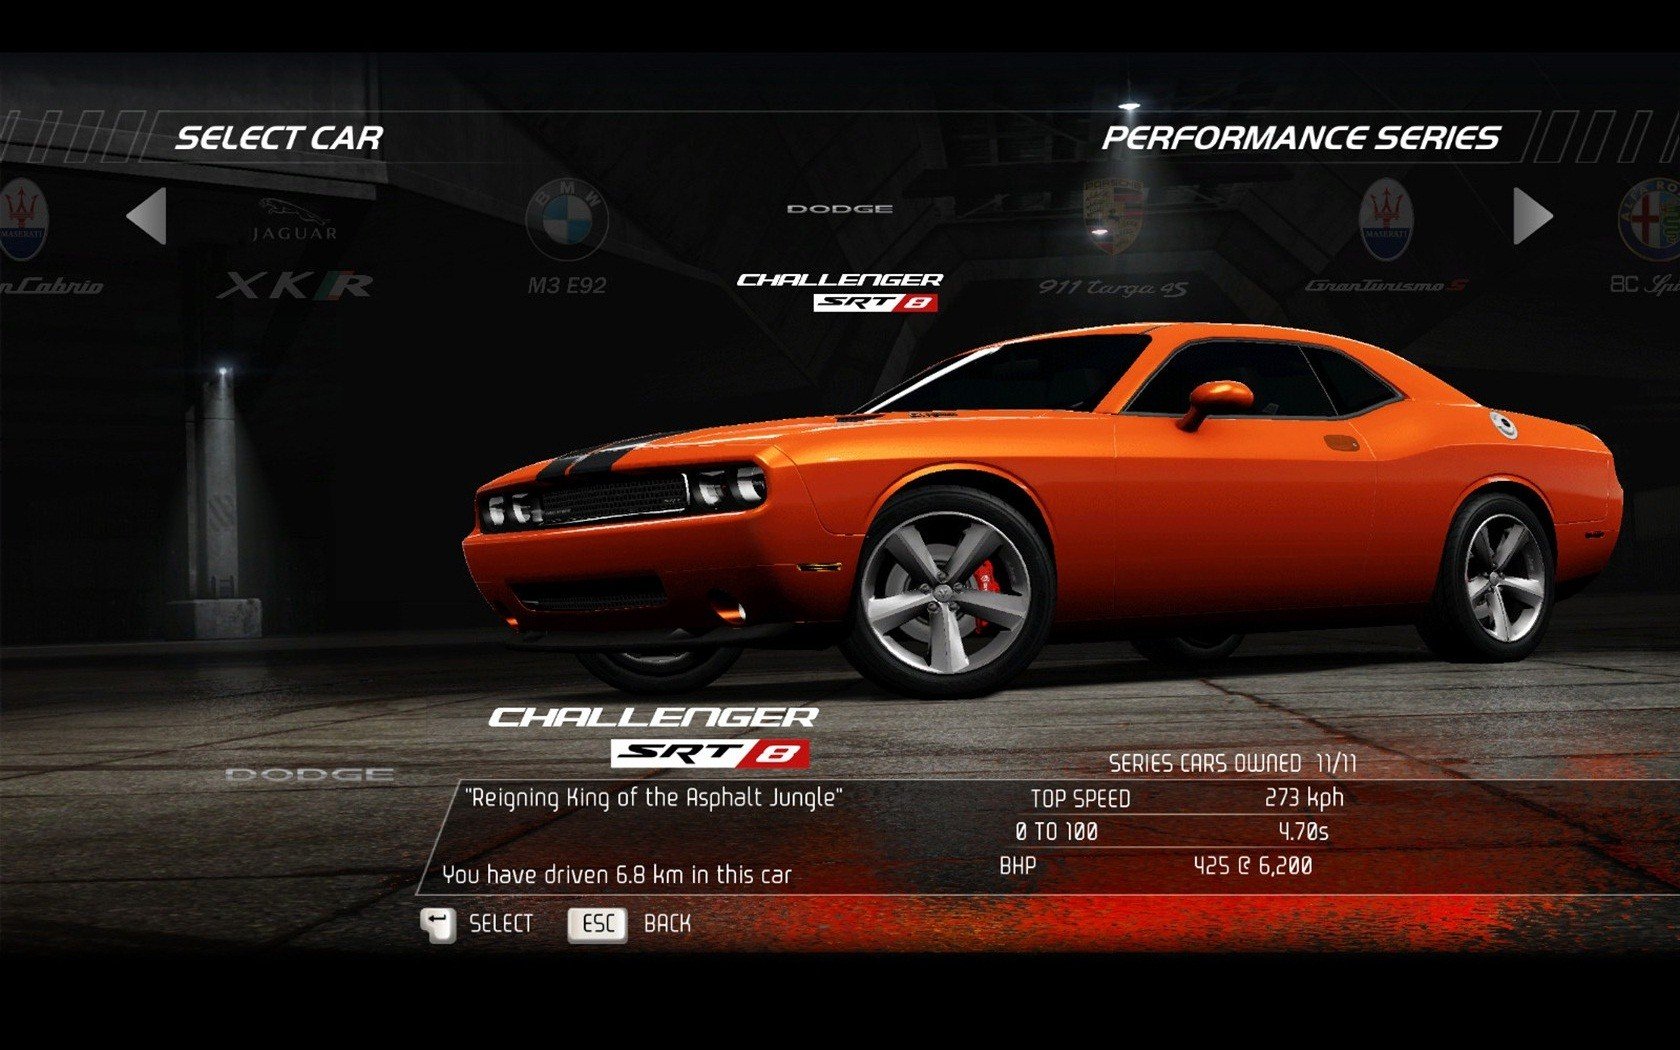 video, Games, Cars, Dodge, Challenger, Need, For, Speed, Hot, Pursuit, Dodge, Challenger, Srt8, Pc, Games Wallpaper